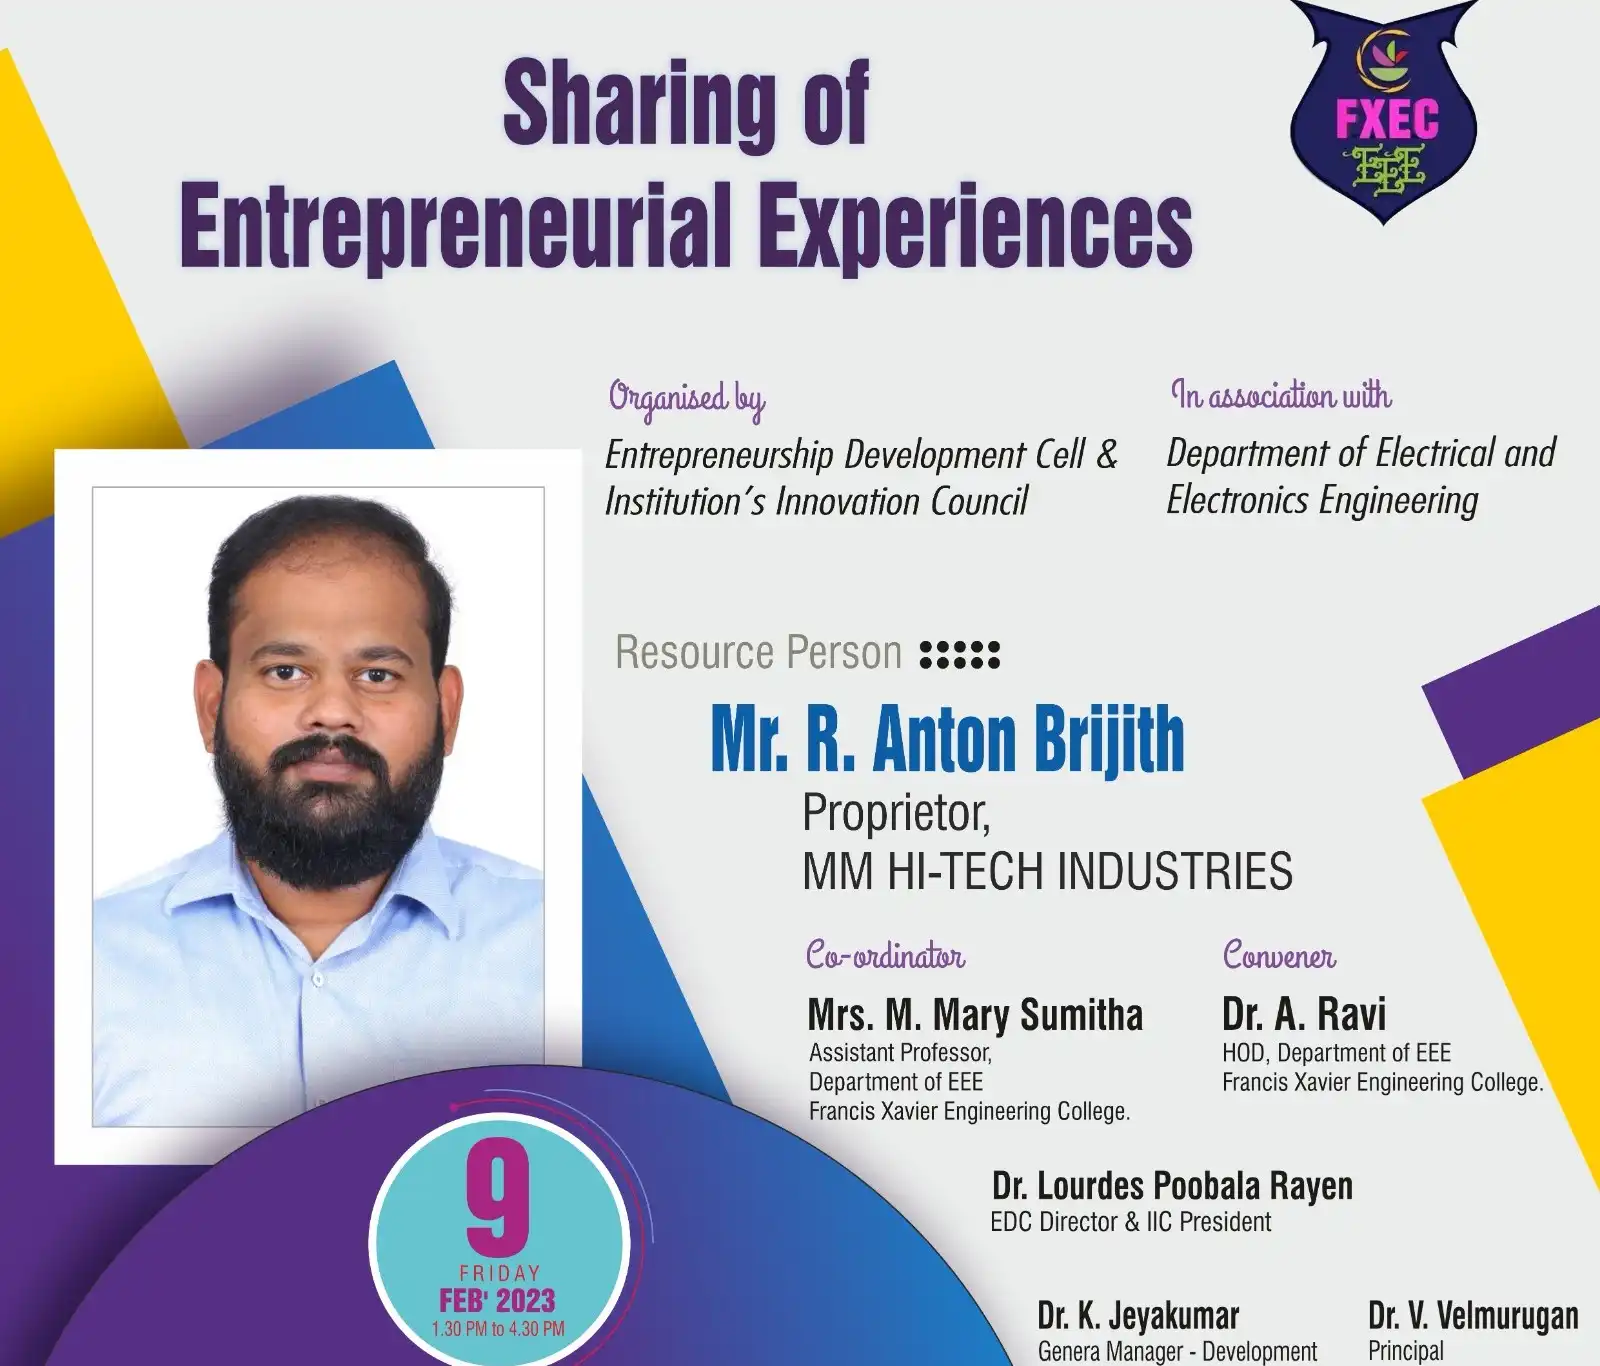 Sharing of Entrepreneurial Experiences